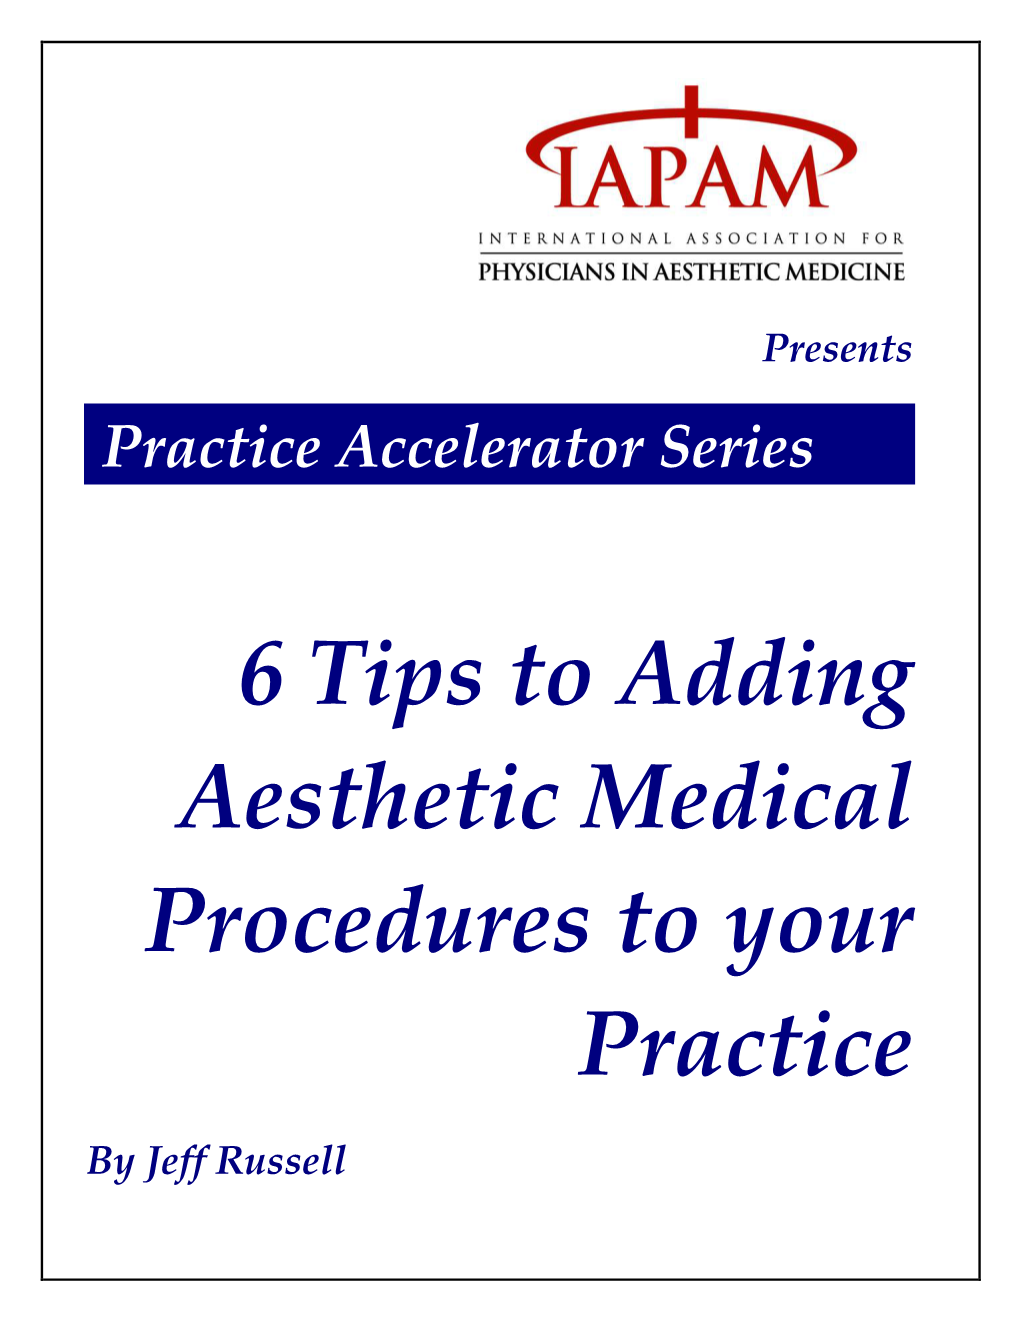 6 Tips to Adding Aesthetic Medical Procedures to Your Practice